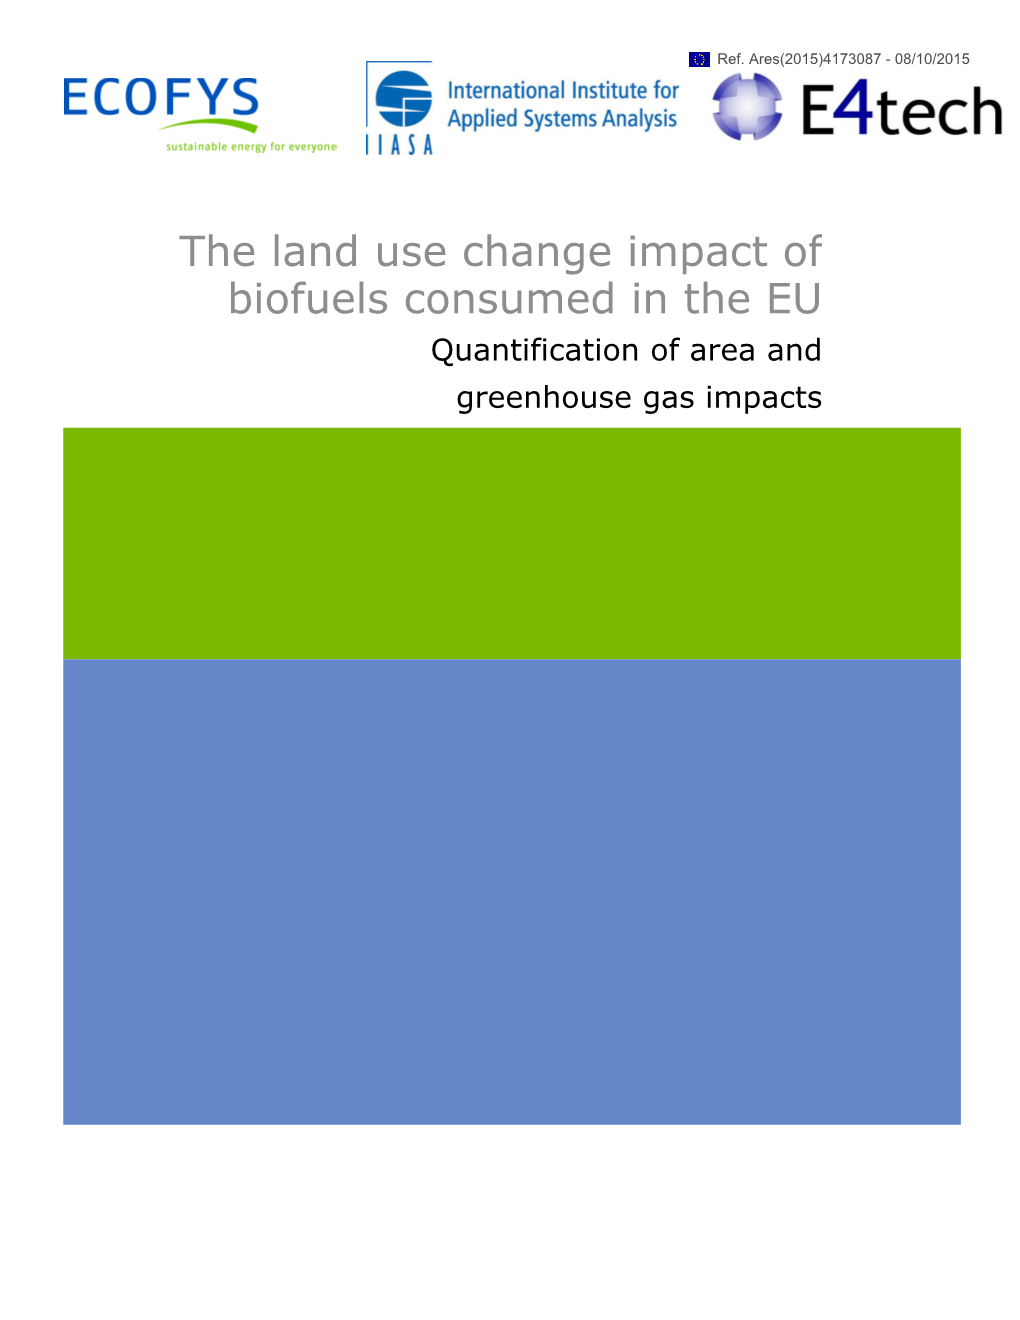 The Land Use Change Impact of Biofuels Consumed in the EU Quantification of Area and Greenhouse Gas Impacts